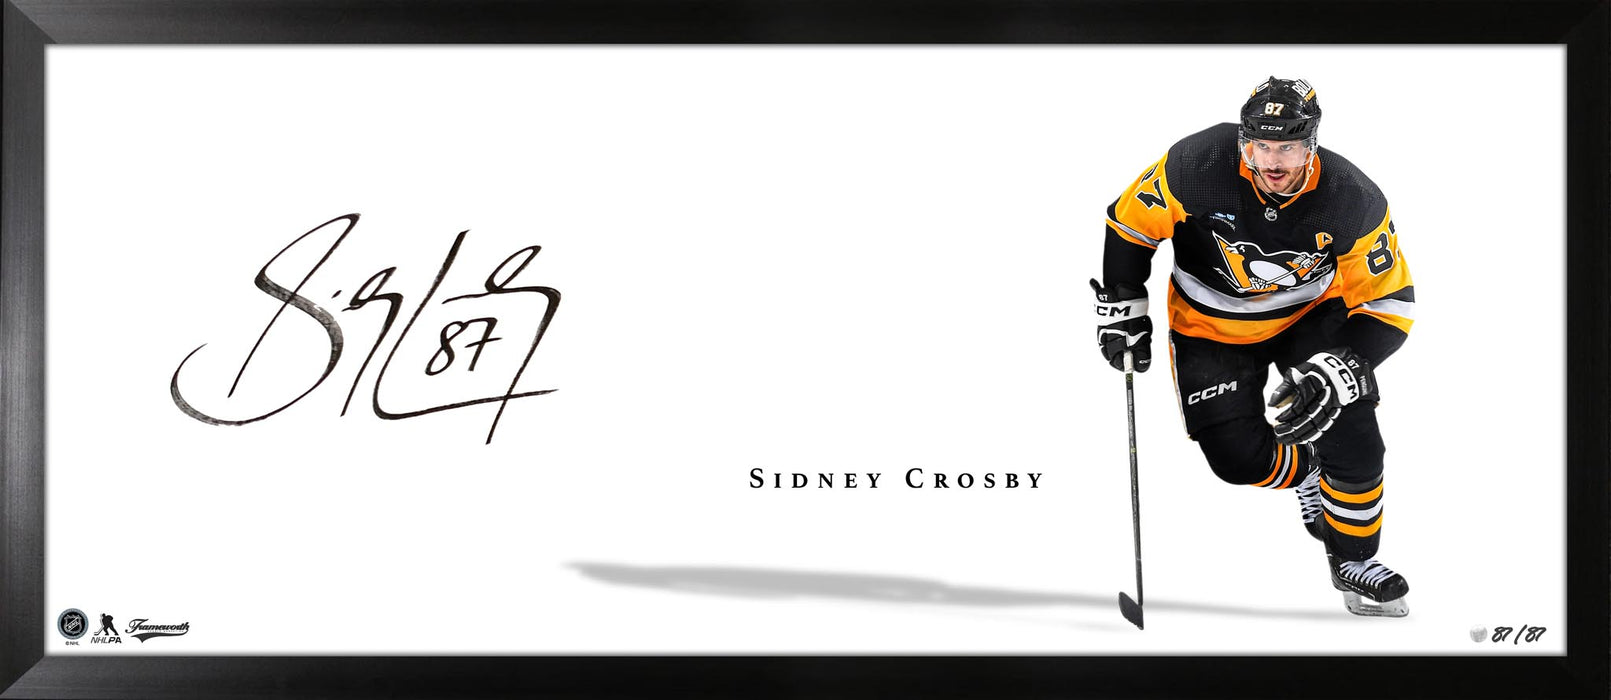 Sidney Crosby Signed 18x44 Framed Print Penguins White Background-H (Limited Edition of 87)